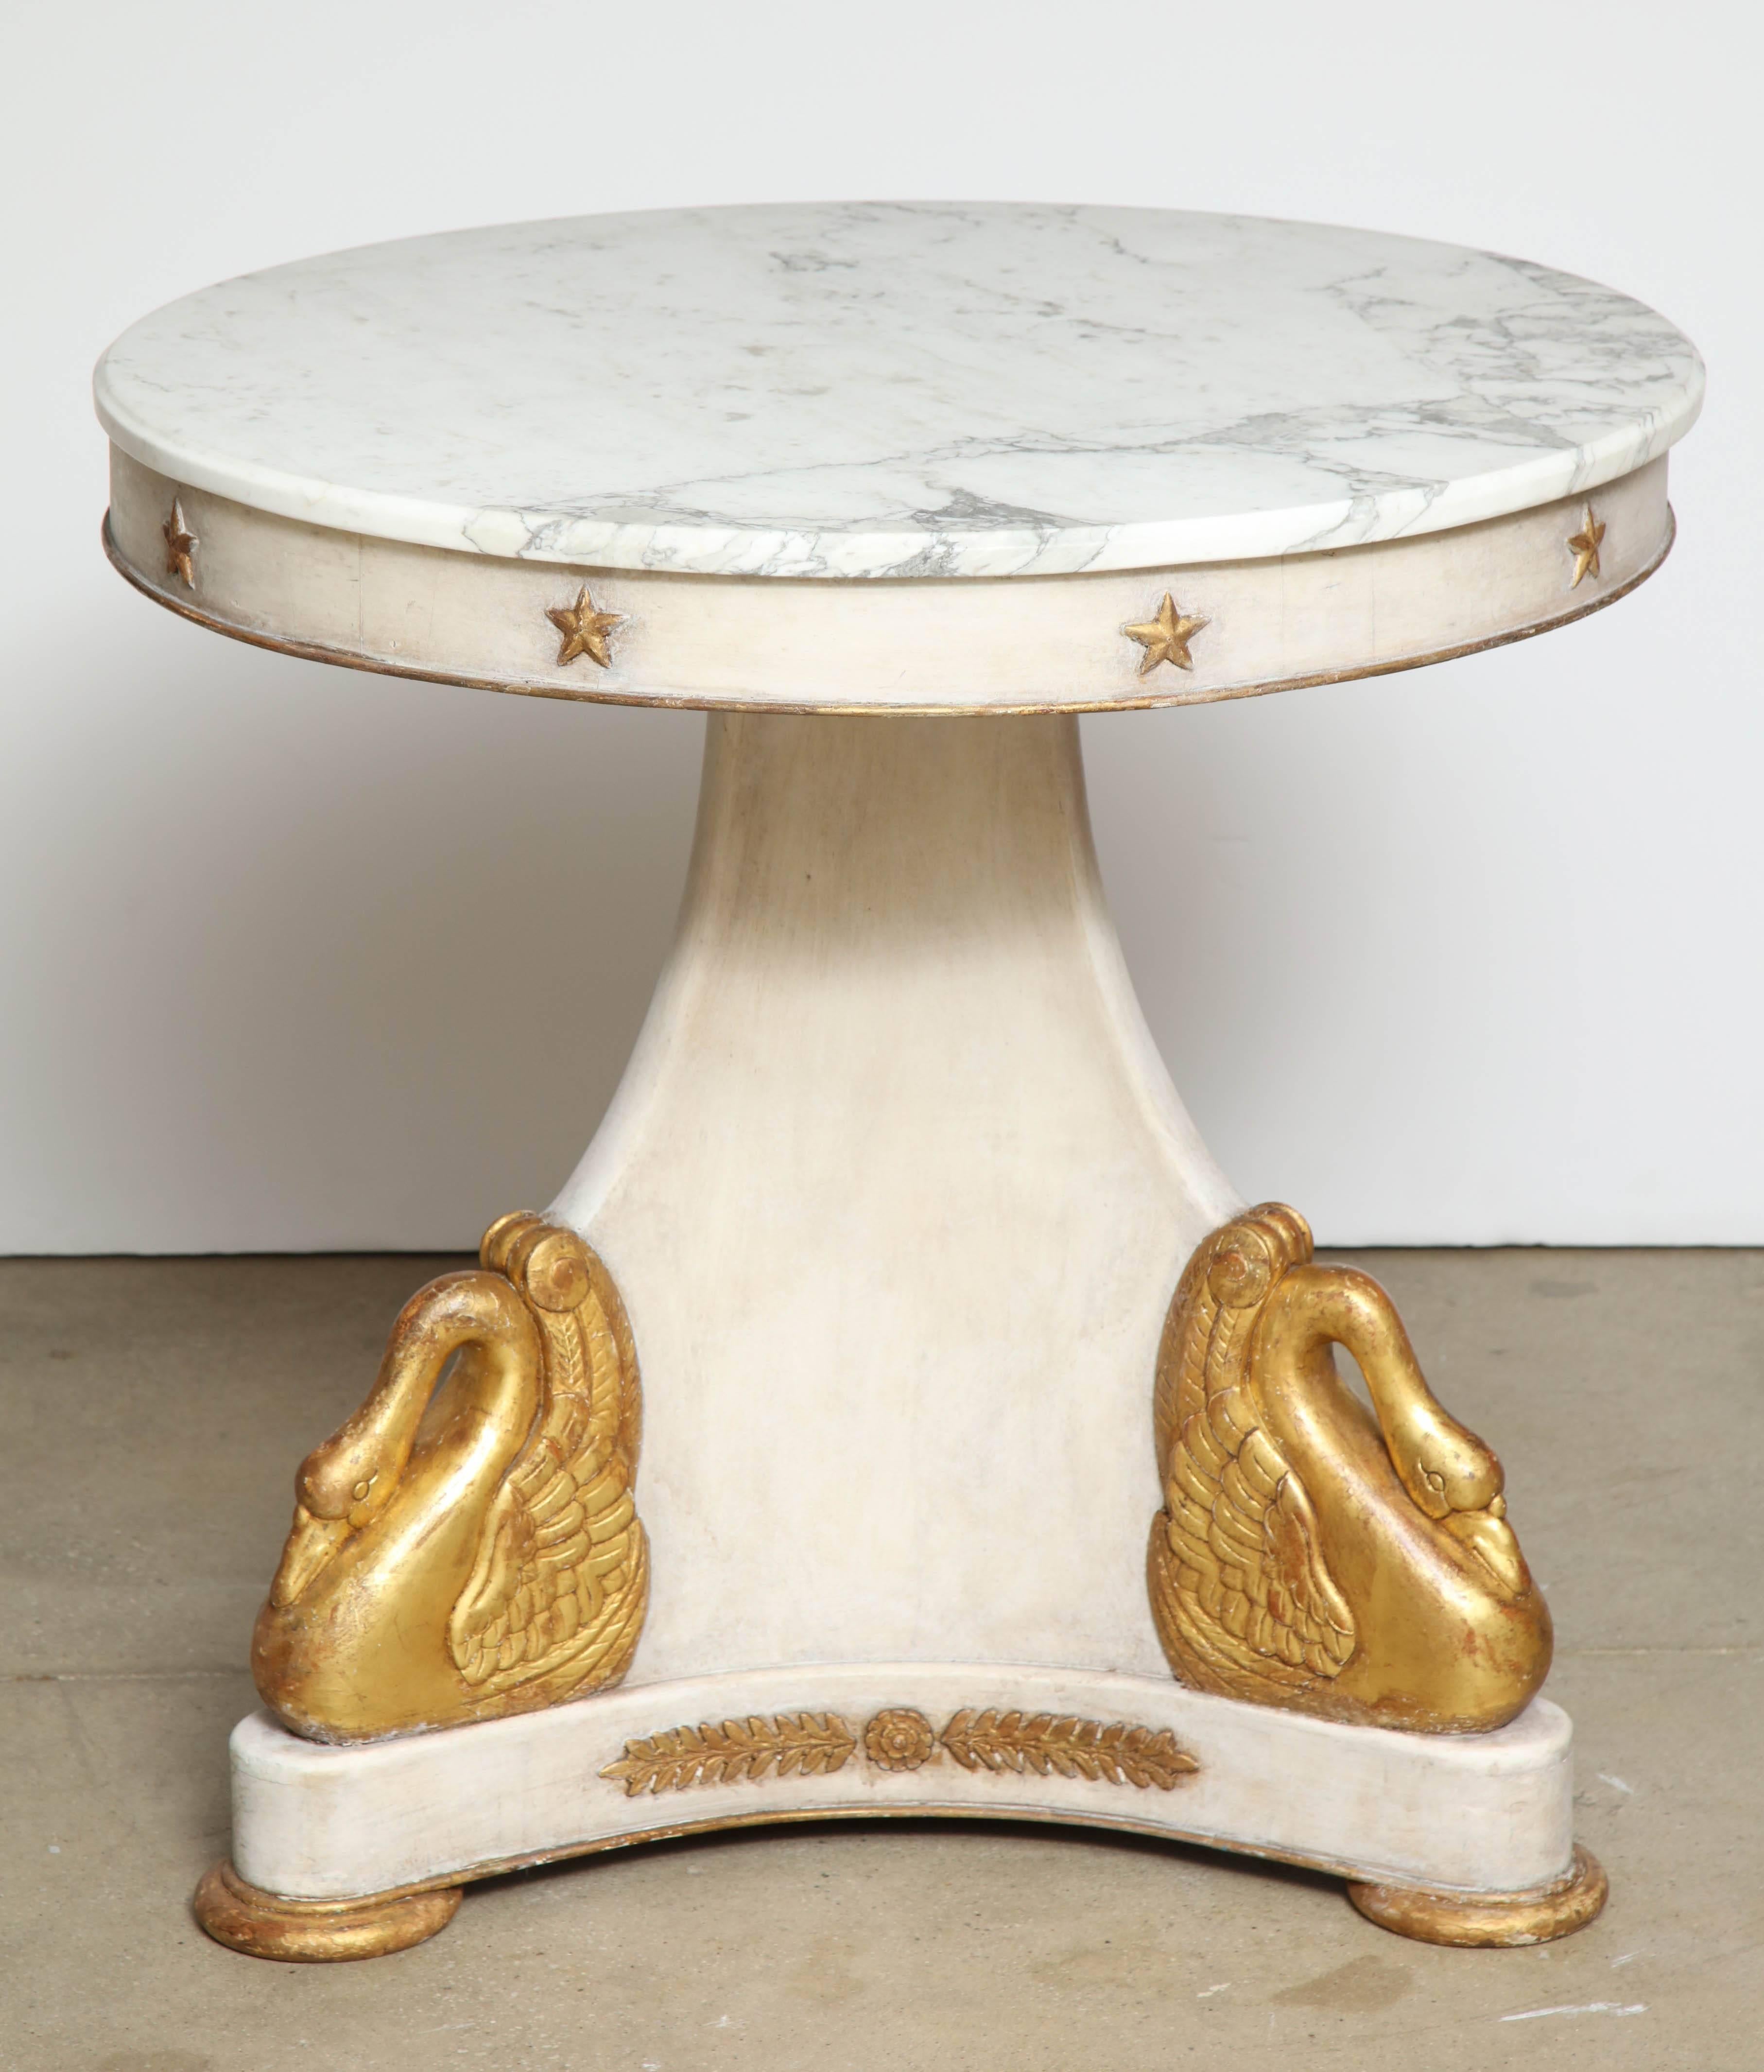 A most unique and unusual round table. The center pedestal base is painted in a grayish white featuring three stunning swans in a gold leaf finish, a detailed laurel leaf design, and three gilt round feet. The apron is painted and accented with gilt